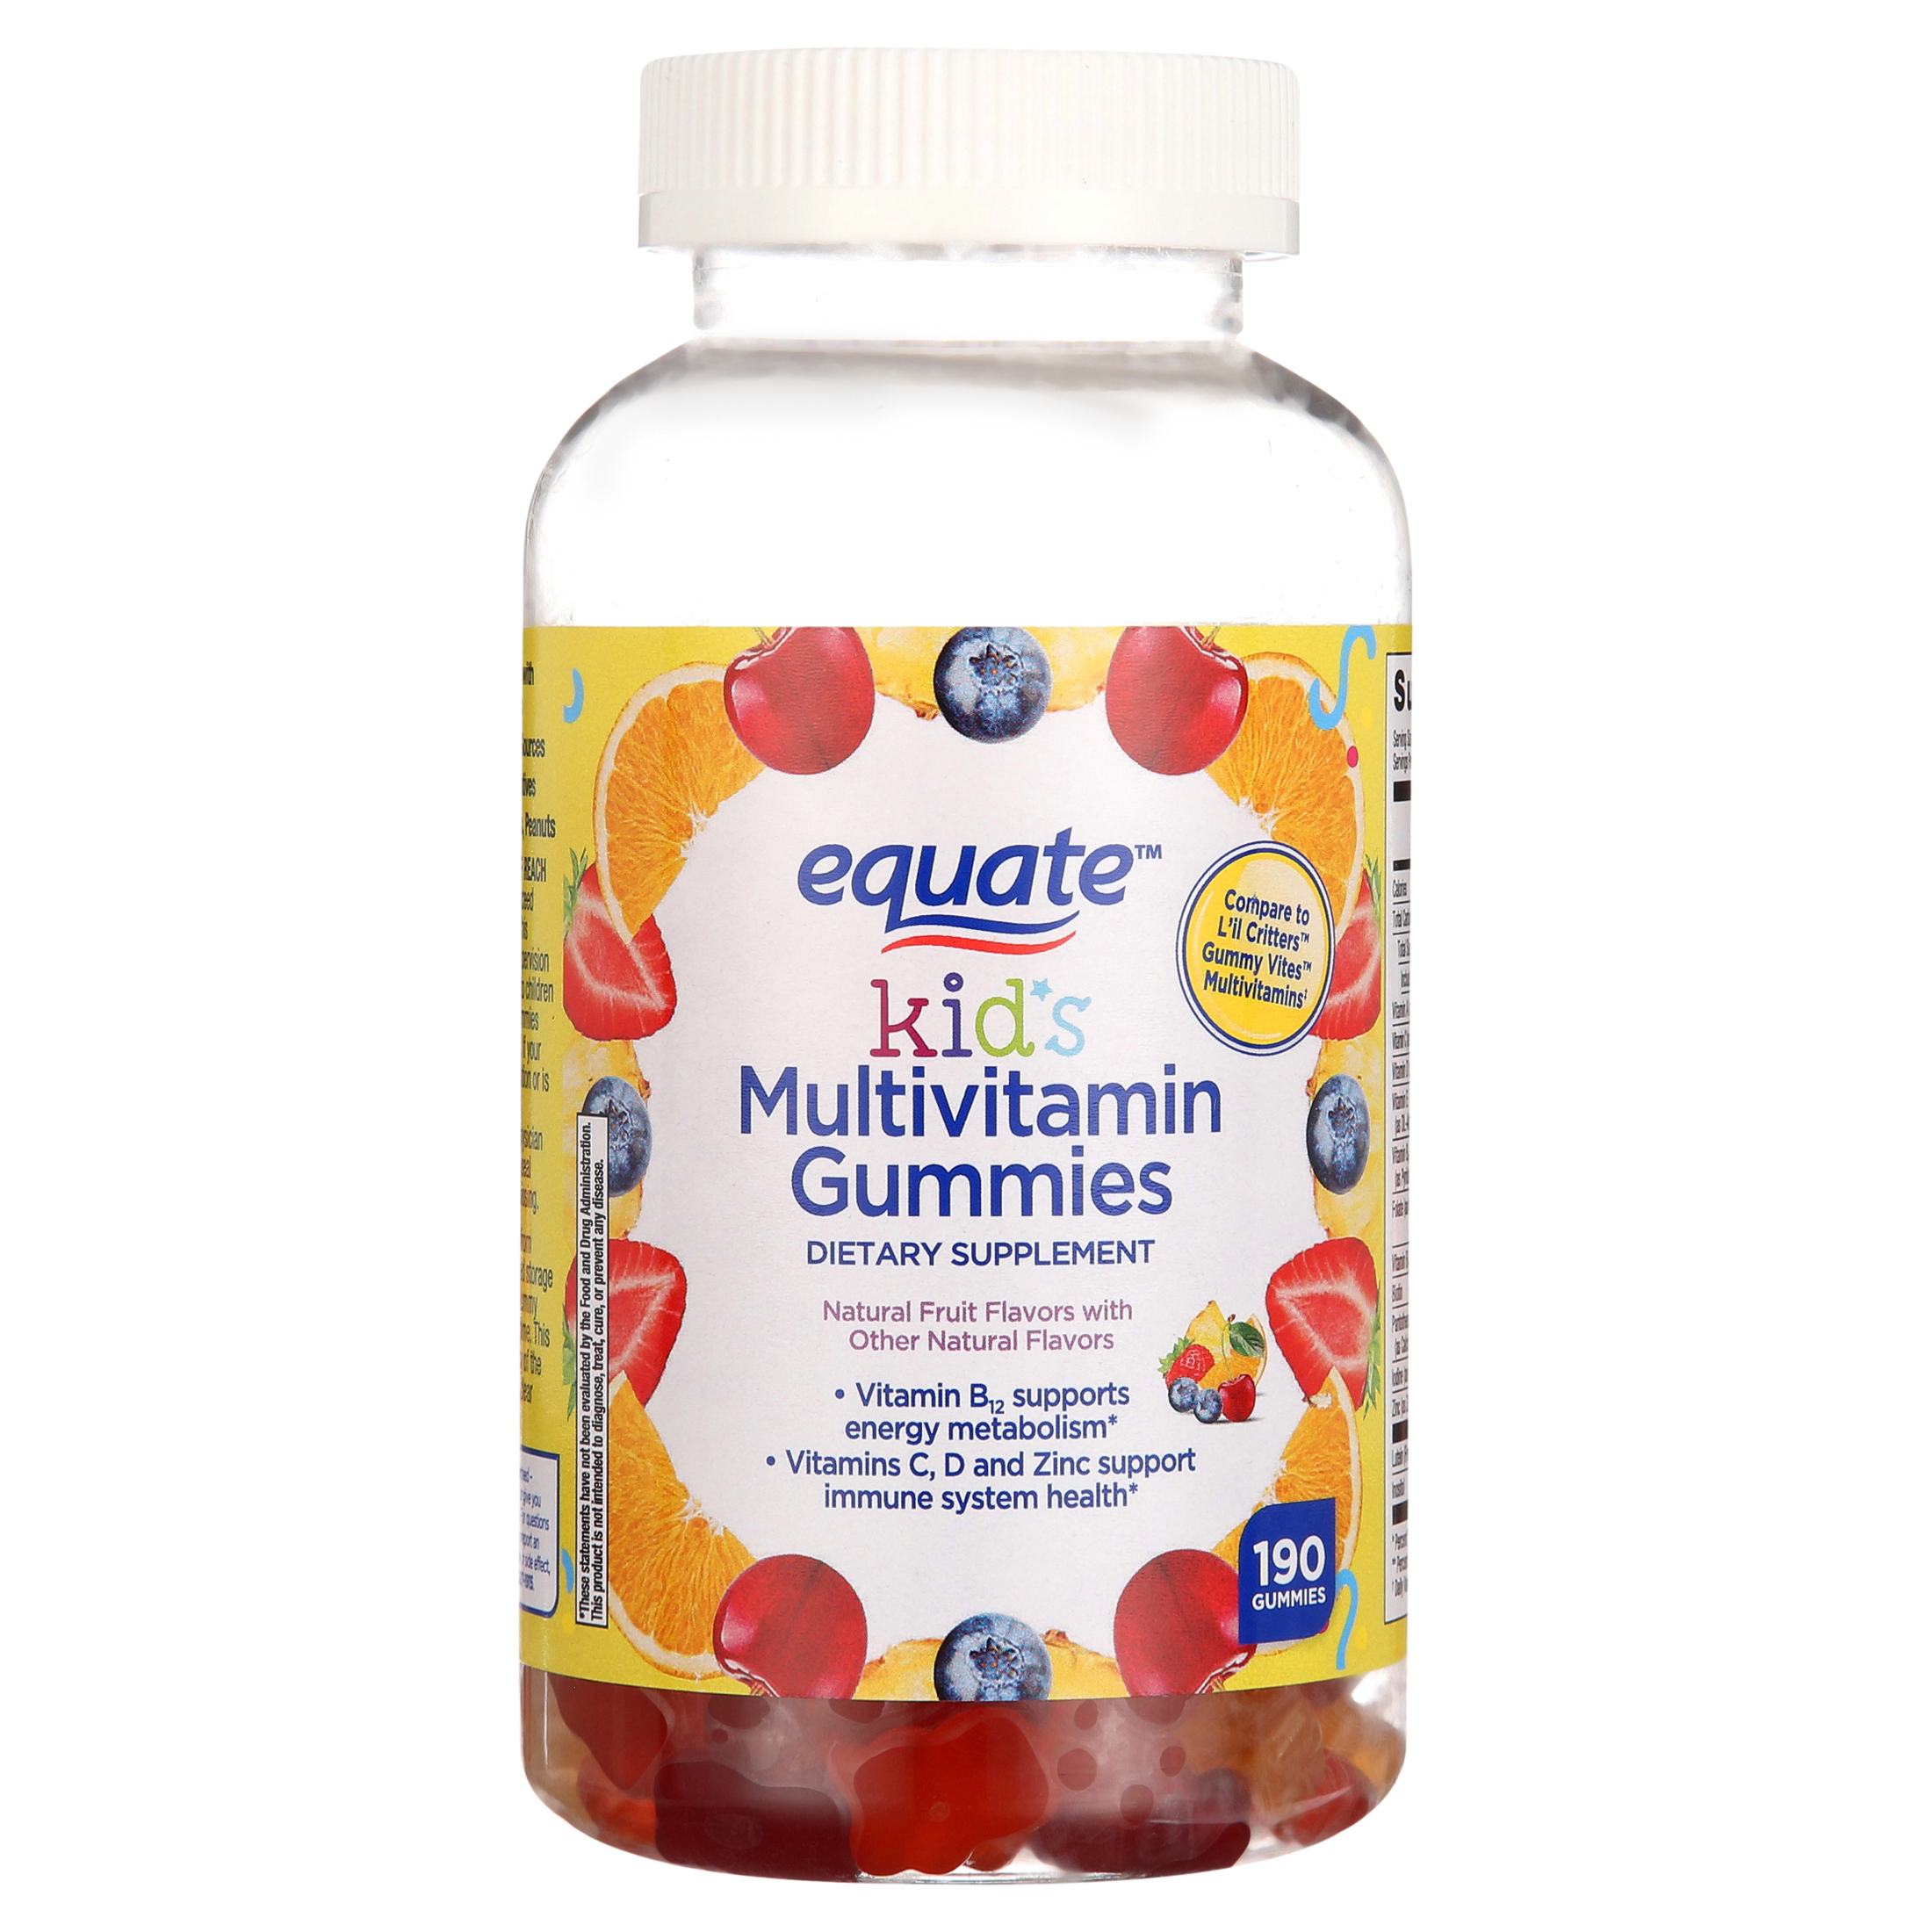 Equate Kids Multivitamin Gummies for General Health, Natural Fruit, 190 Count - image 1 of 6